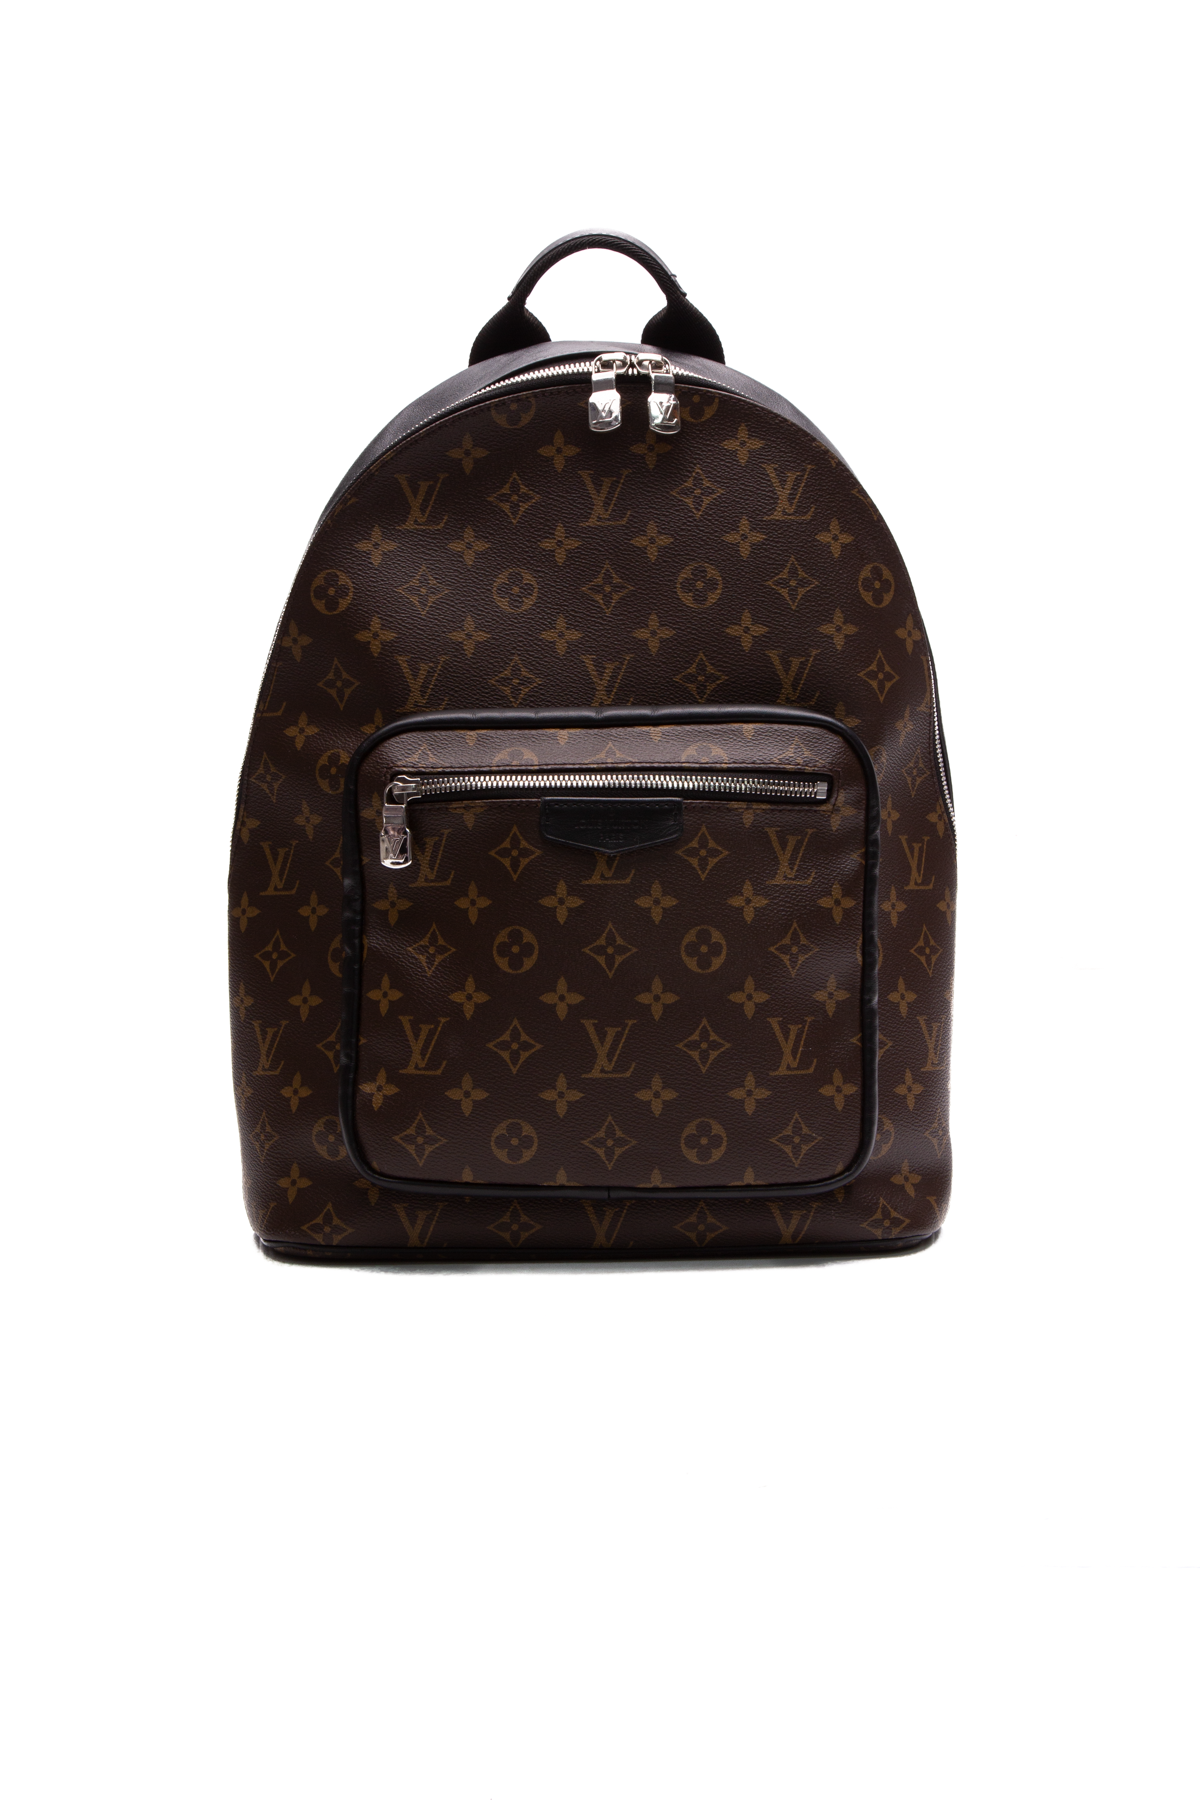 Louis Vuitton Josh Backpack - Couture USA